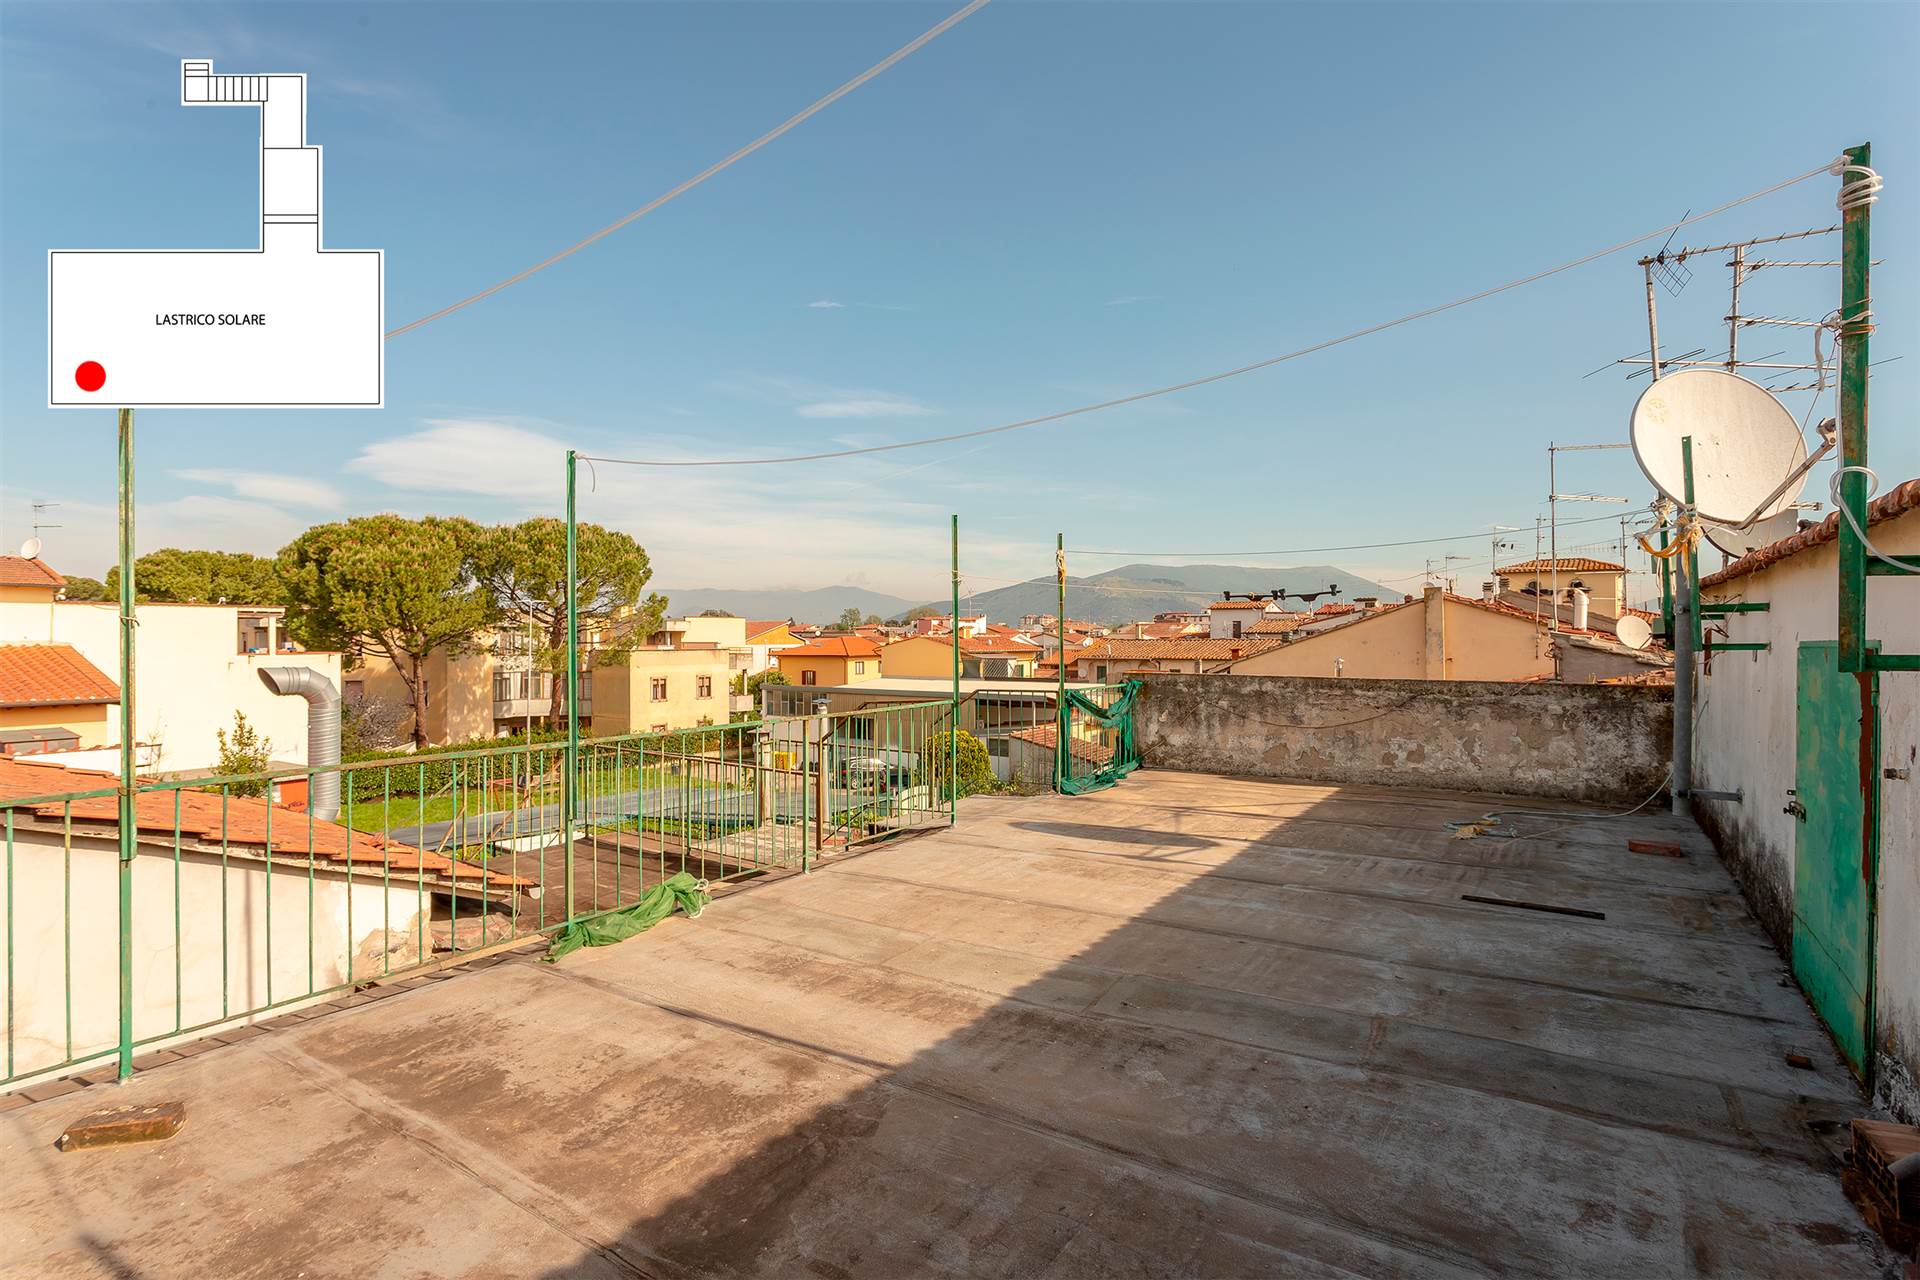 SANTA MARIA, CAMPI BISENZIO, Detached apartment for sale of 162 Sq. mt., Be restored, Heating Individual heating system, Energetic class: G, placed 